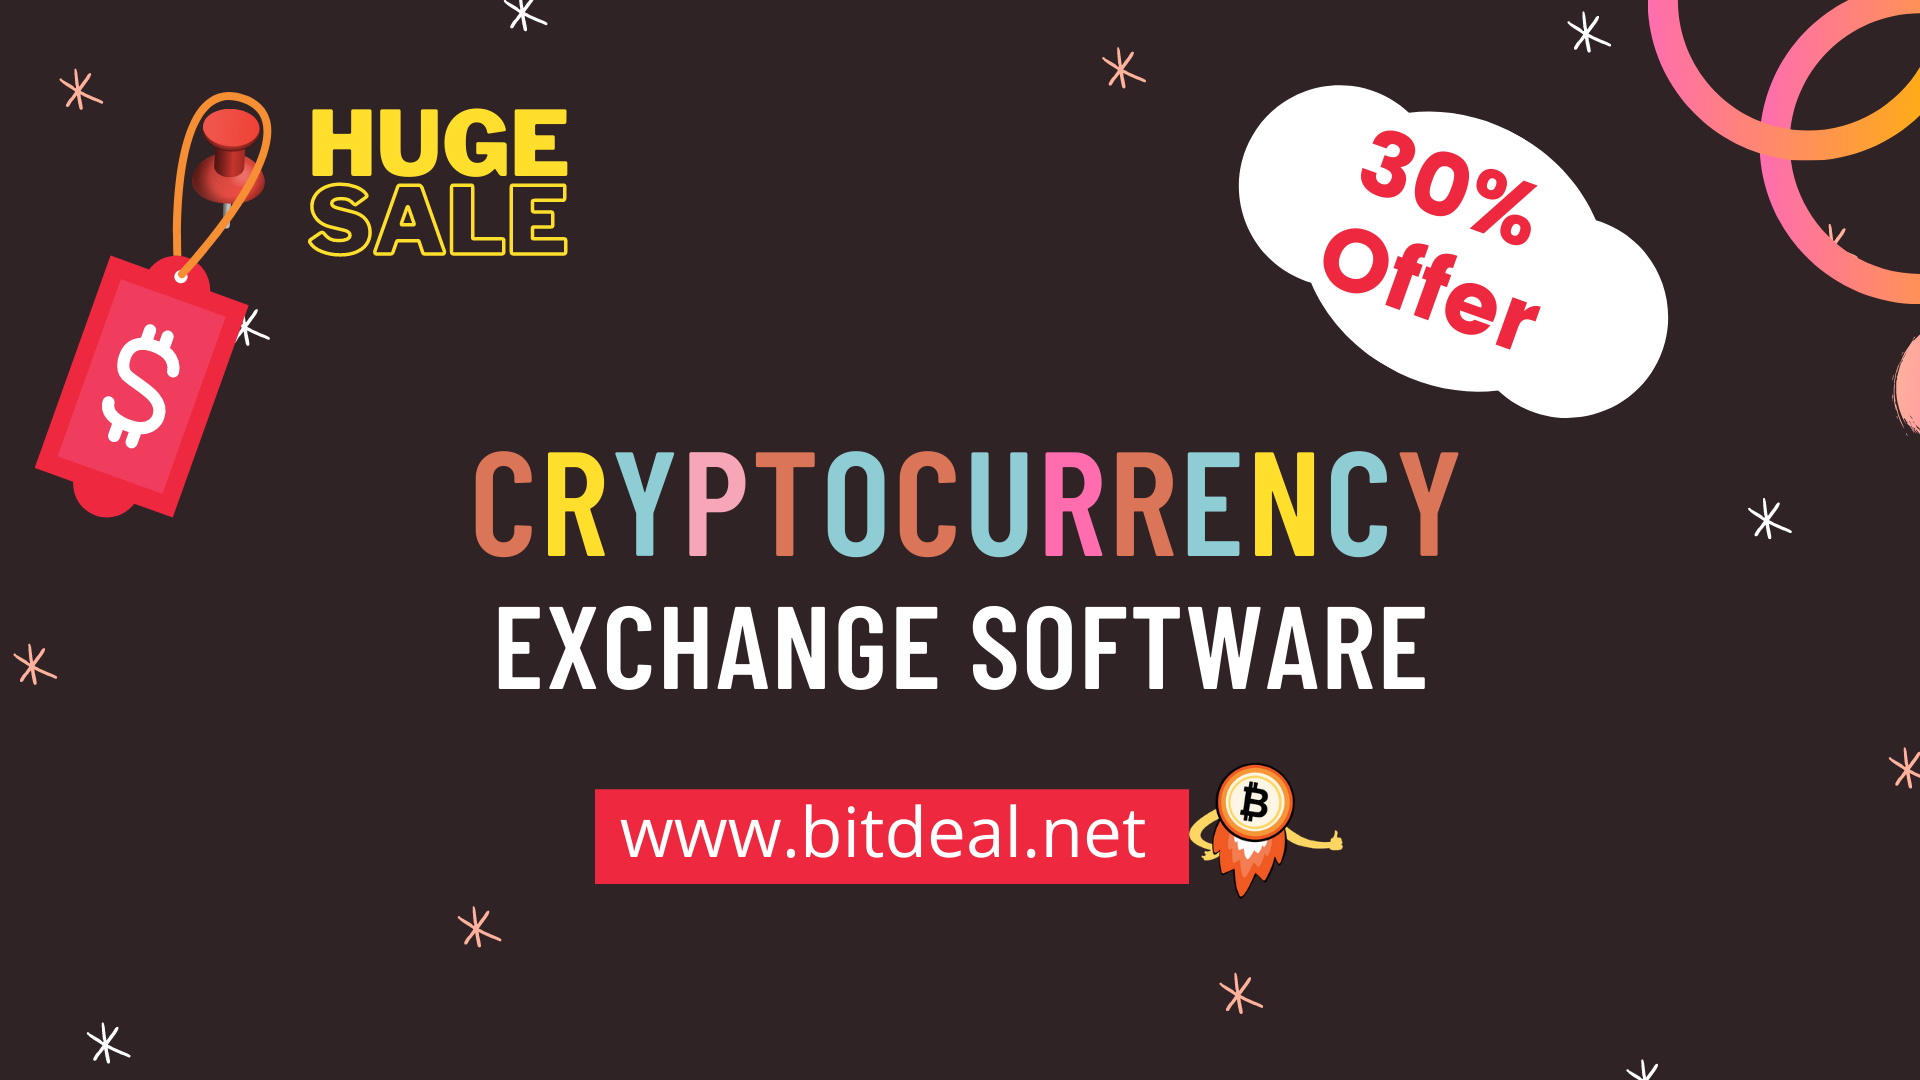 Article about Cryptocurrency Exchange Software